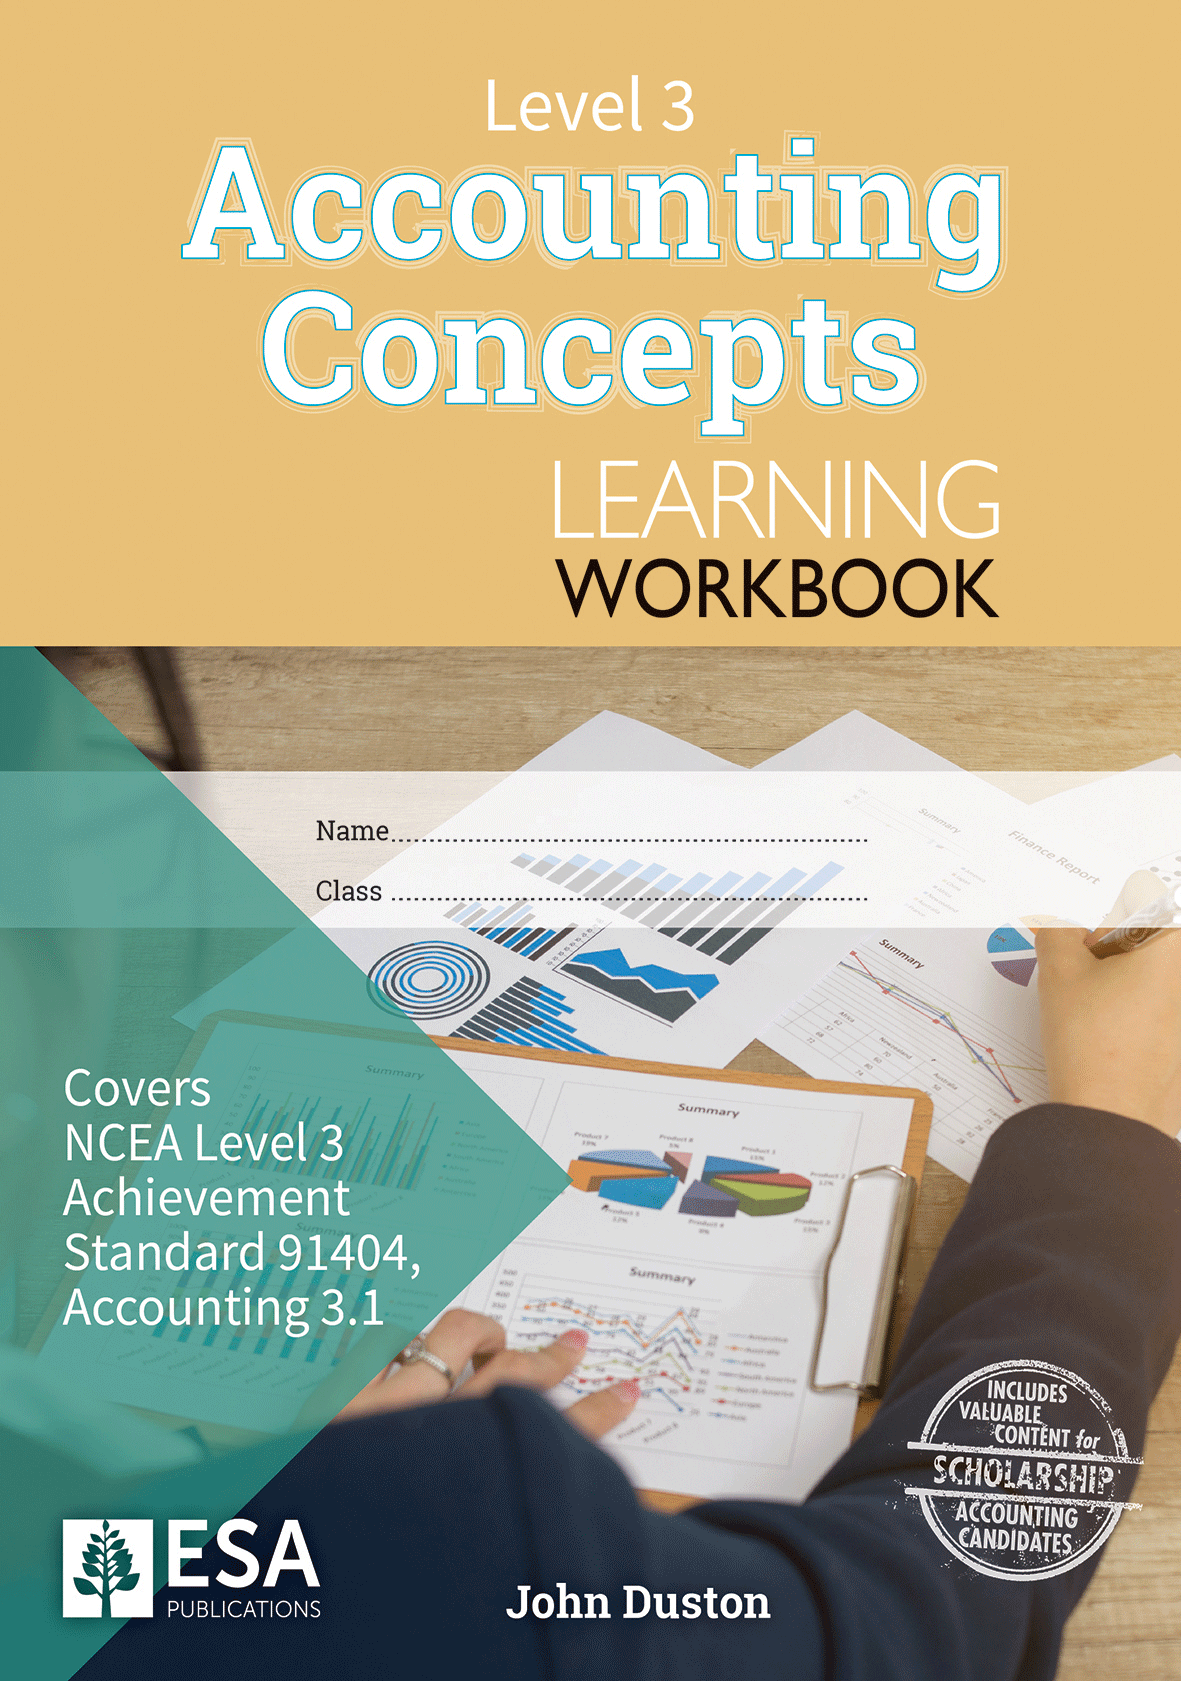 Level 3 Accounting Concepts 3.1 Learning Workbook